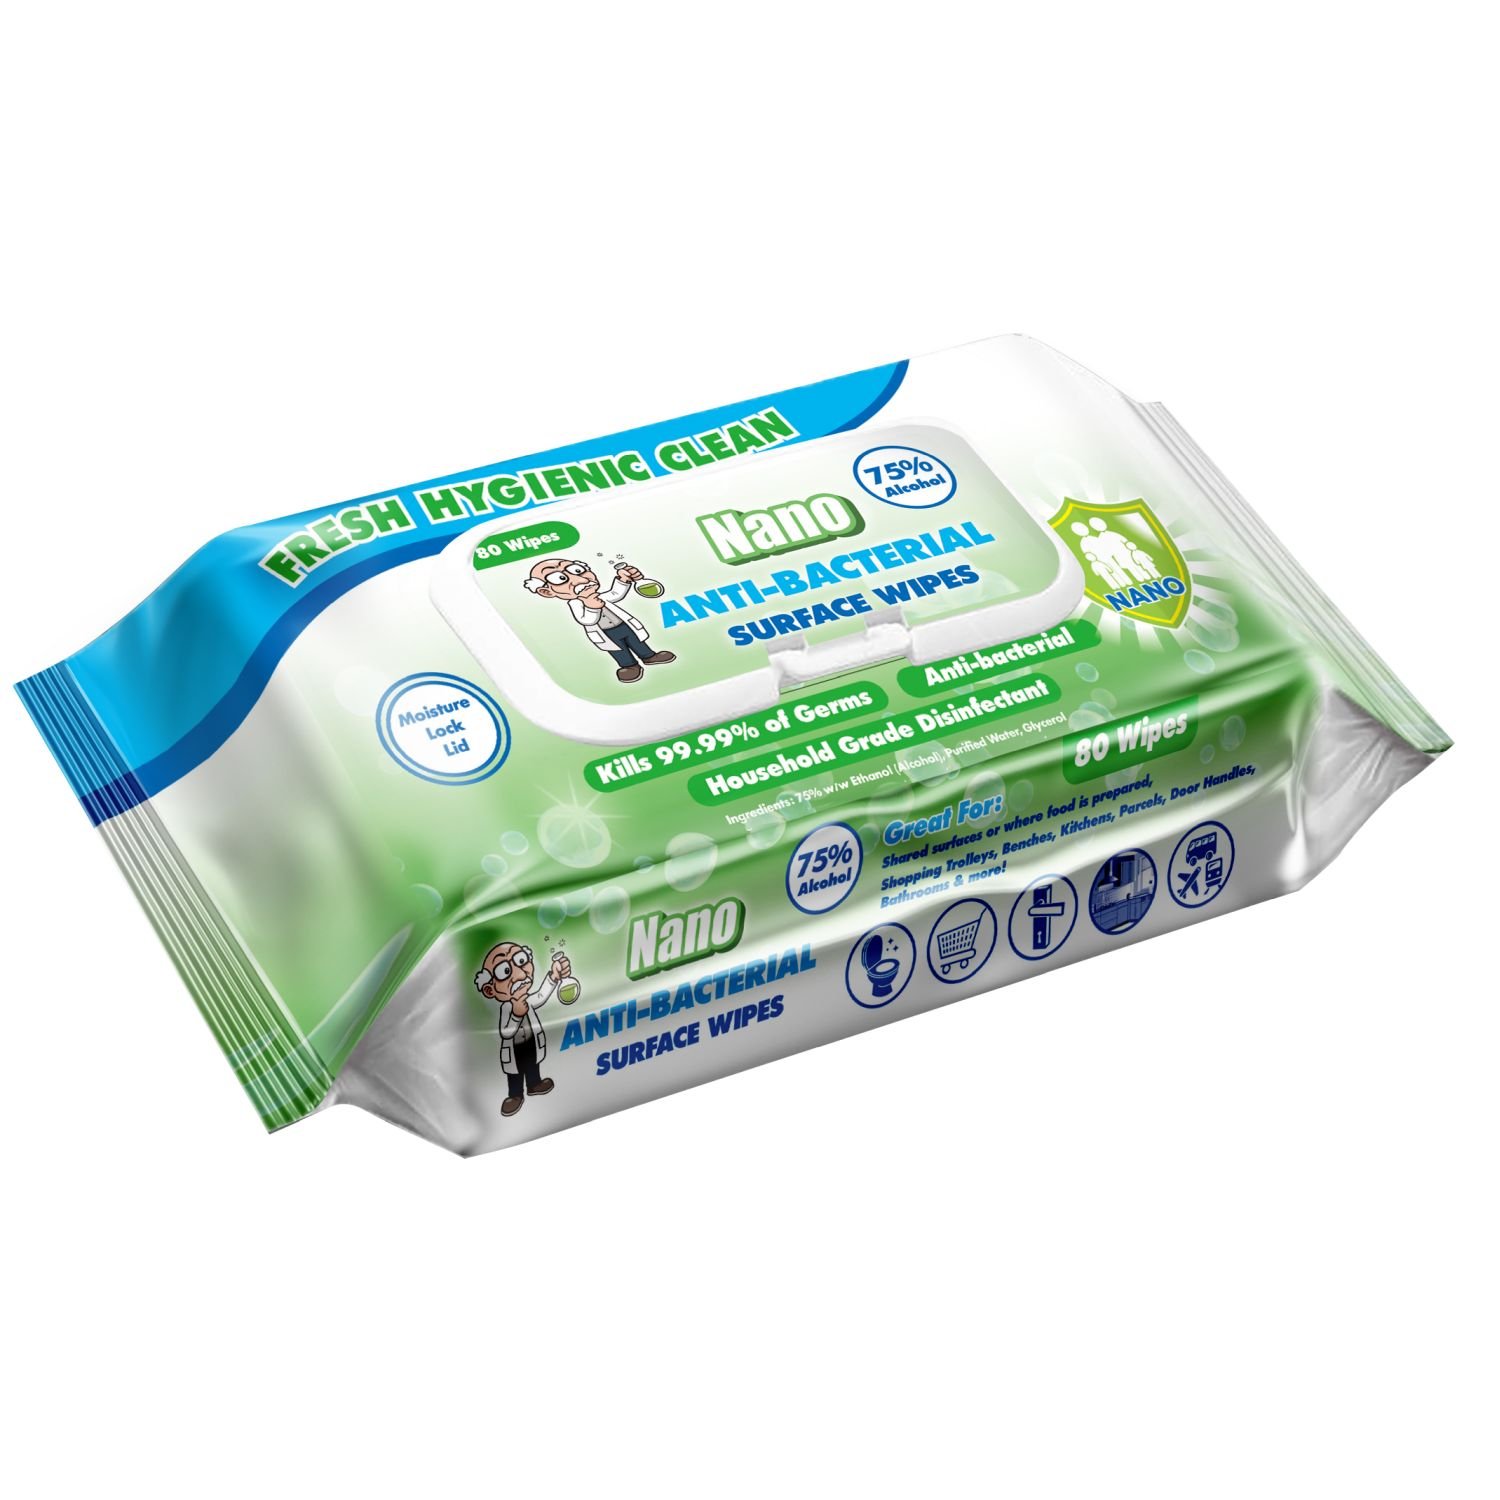 75% Alcohol Anti-Bacterial Surface Wipes Pkt 80